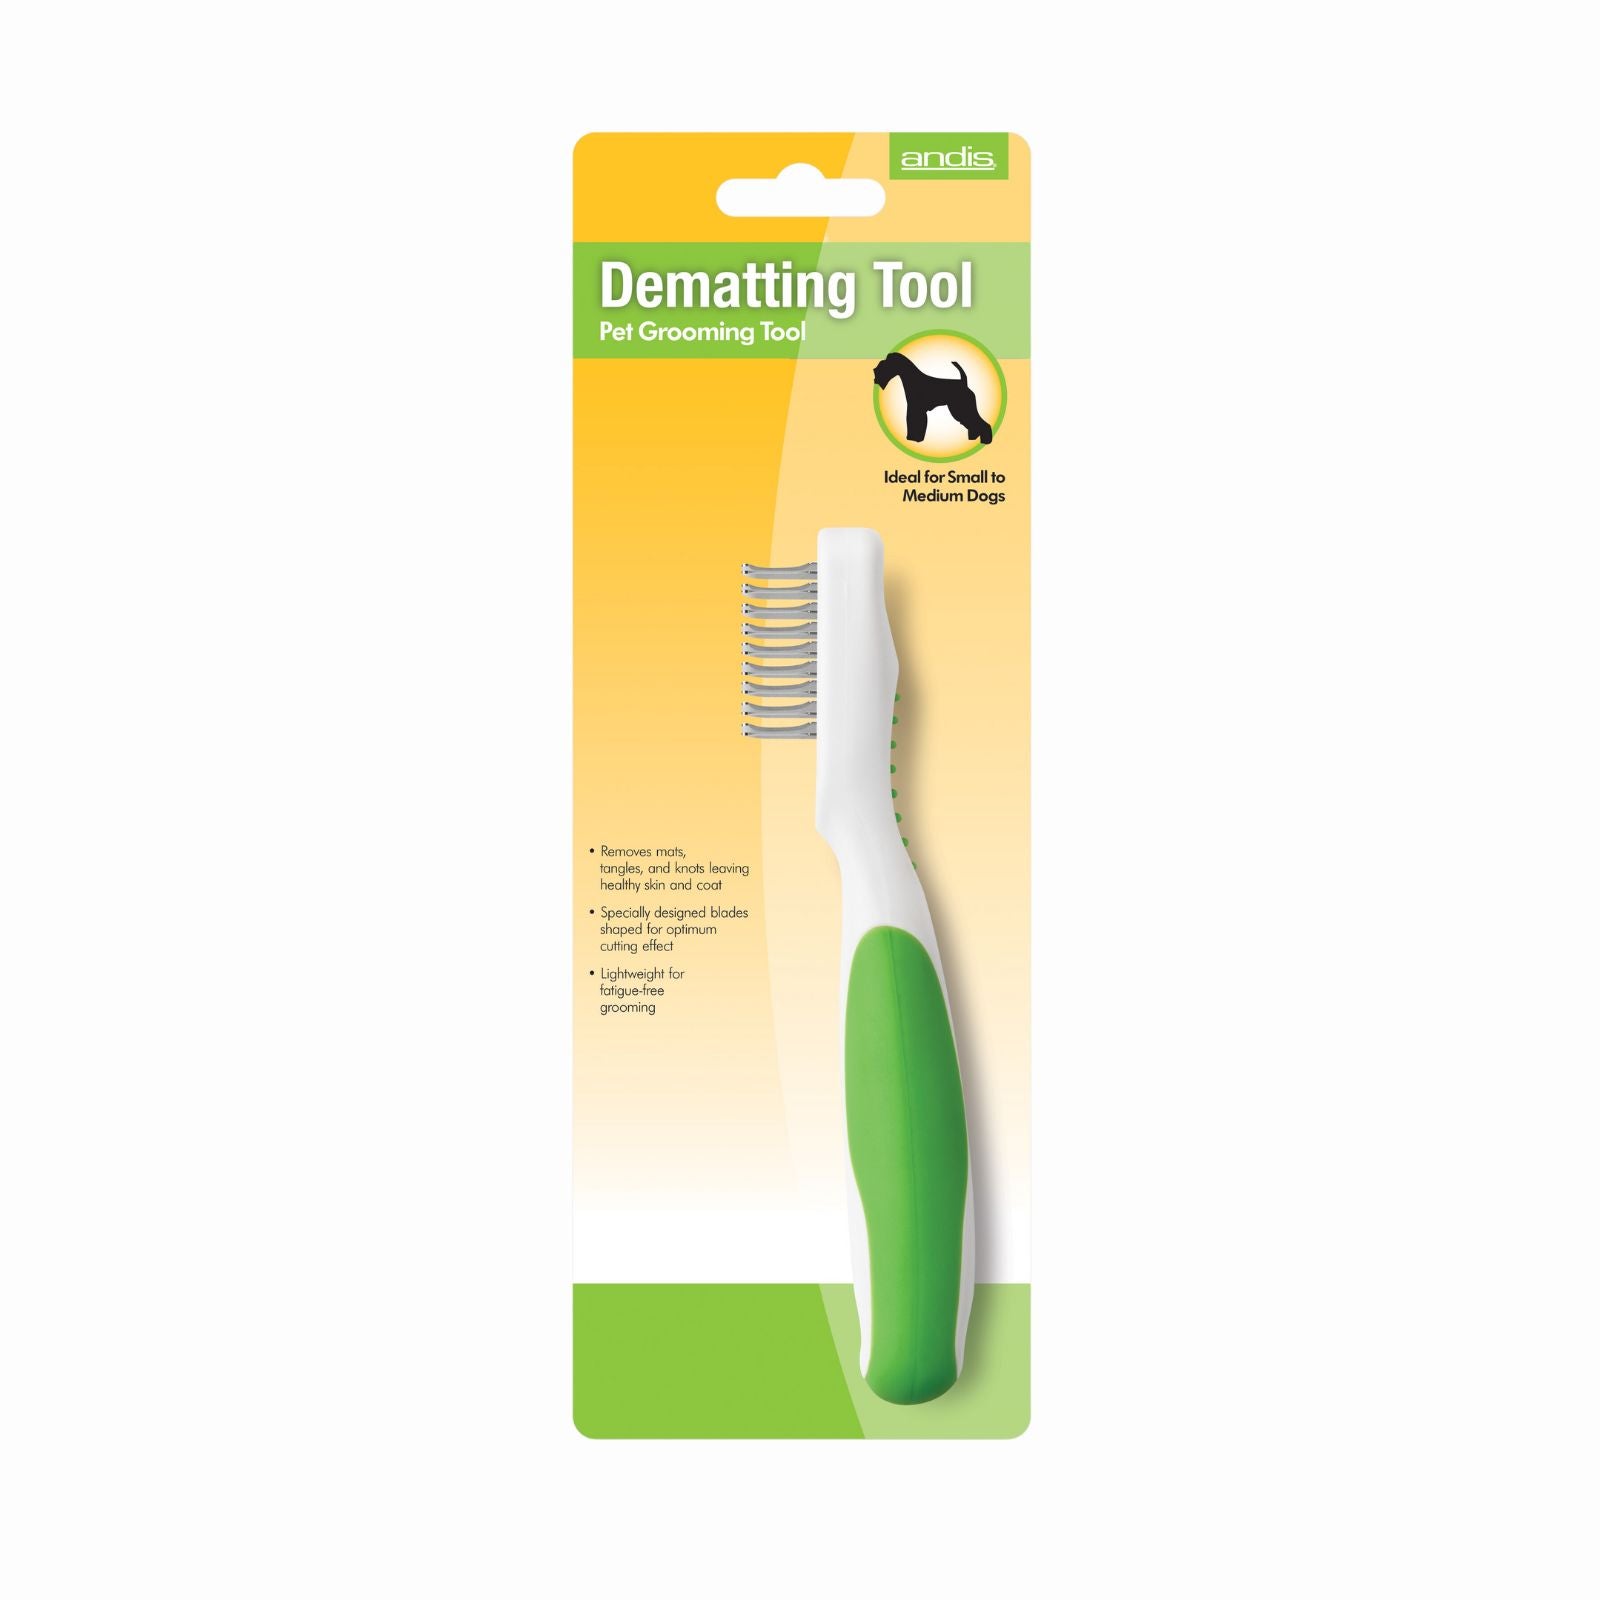 ANDIS Dematting Tool for Small to Medium Dogs